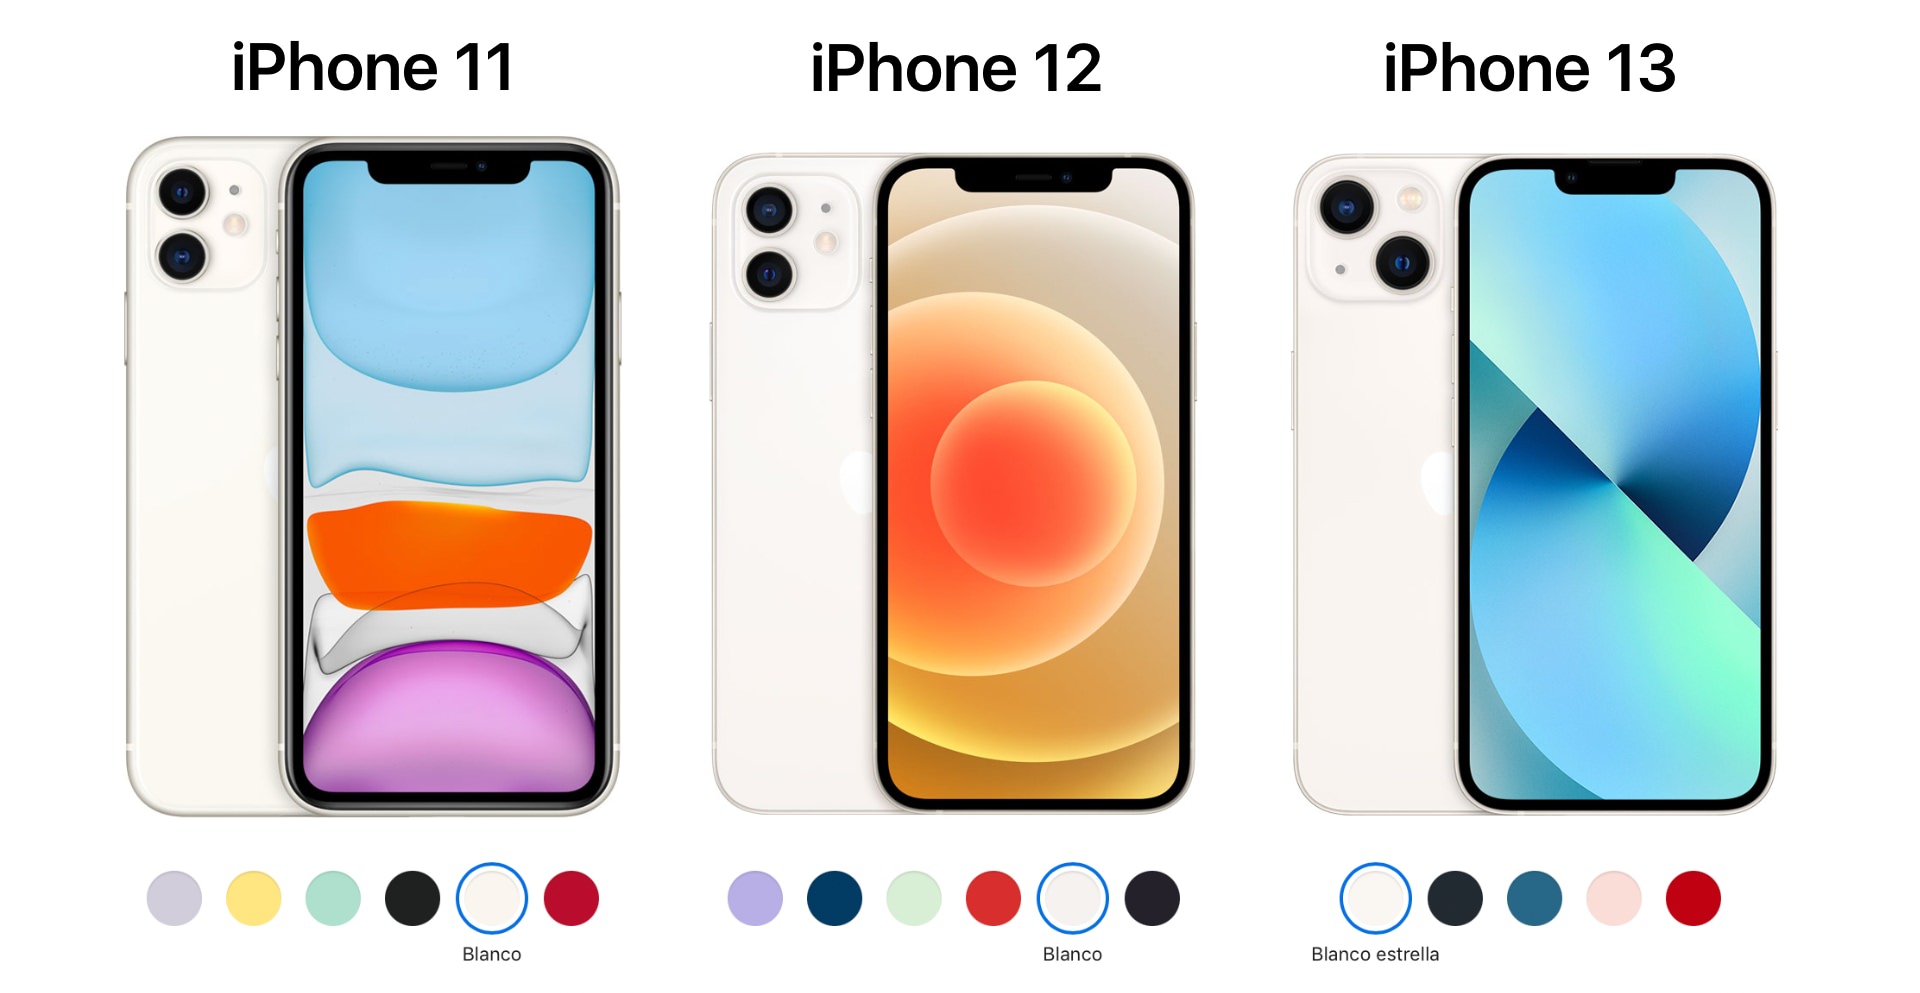 iPhone 11 vs. iPhone 12: What is the difference?